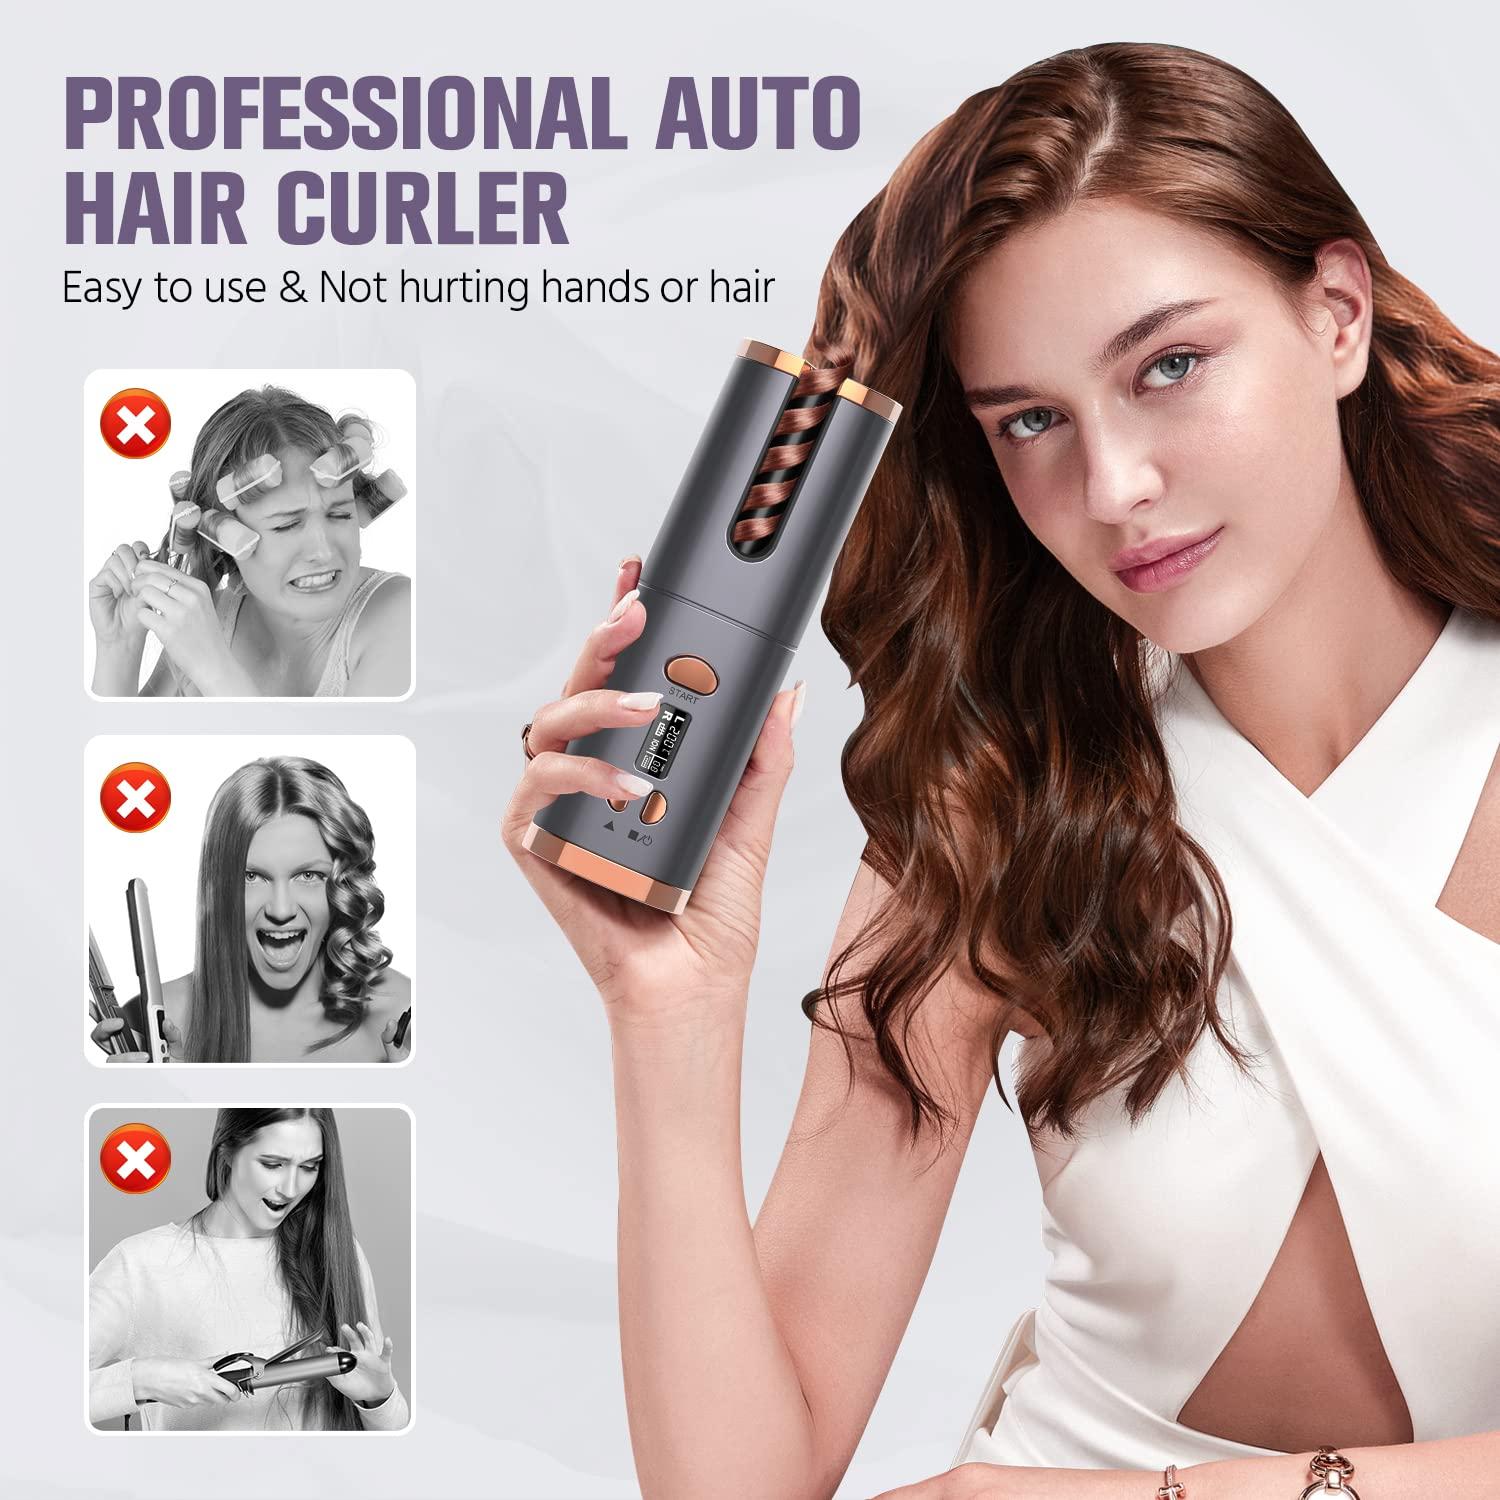 Cordless Hair Curler - Automatic Curling Wand - USB Wireless Curling Iron -  Hair Curling - with 6 Adjustable LCD Temperature Display & Timer Settings -  Rechargeable Portable for Home, Travel Silver